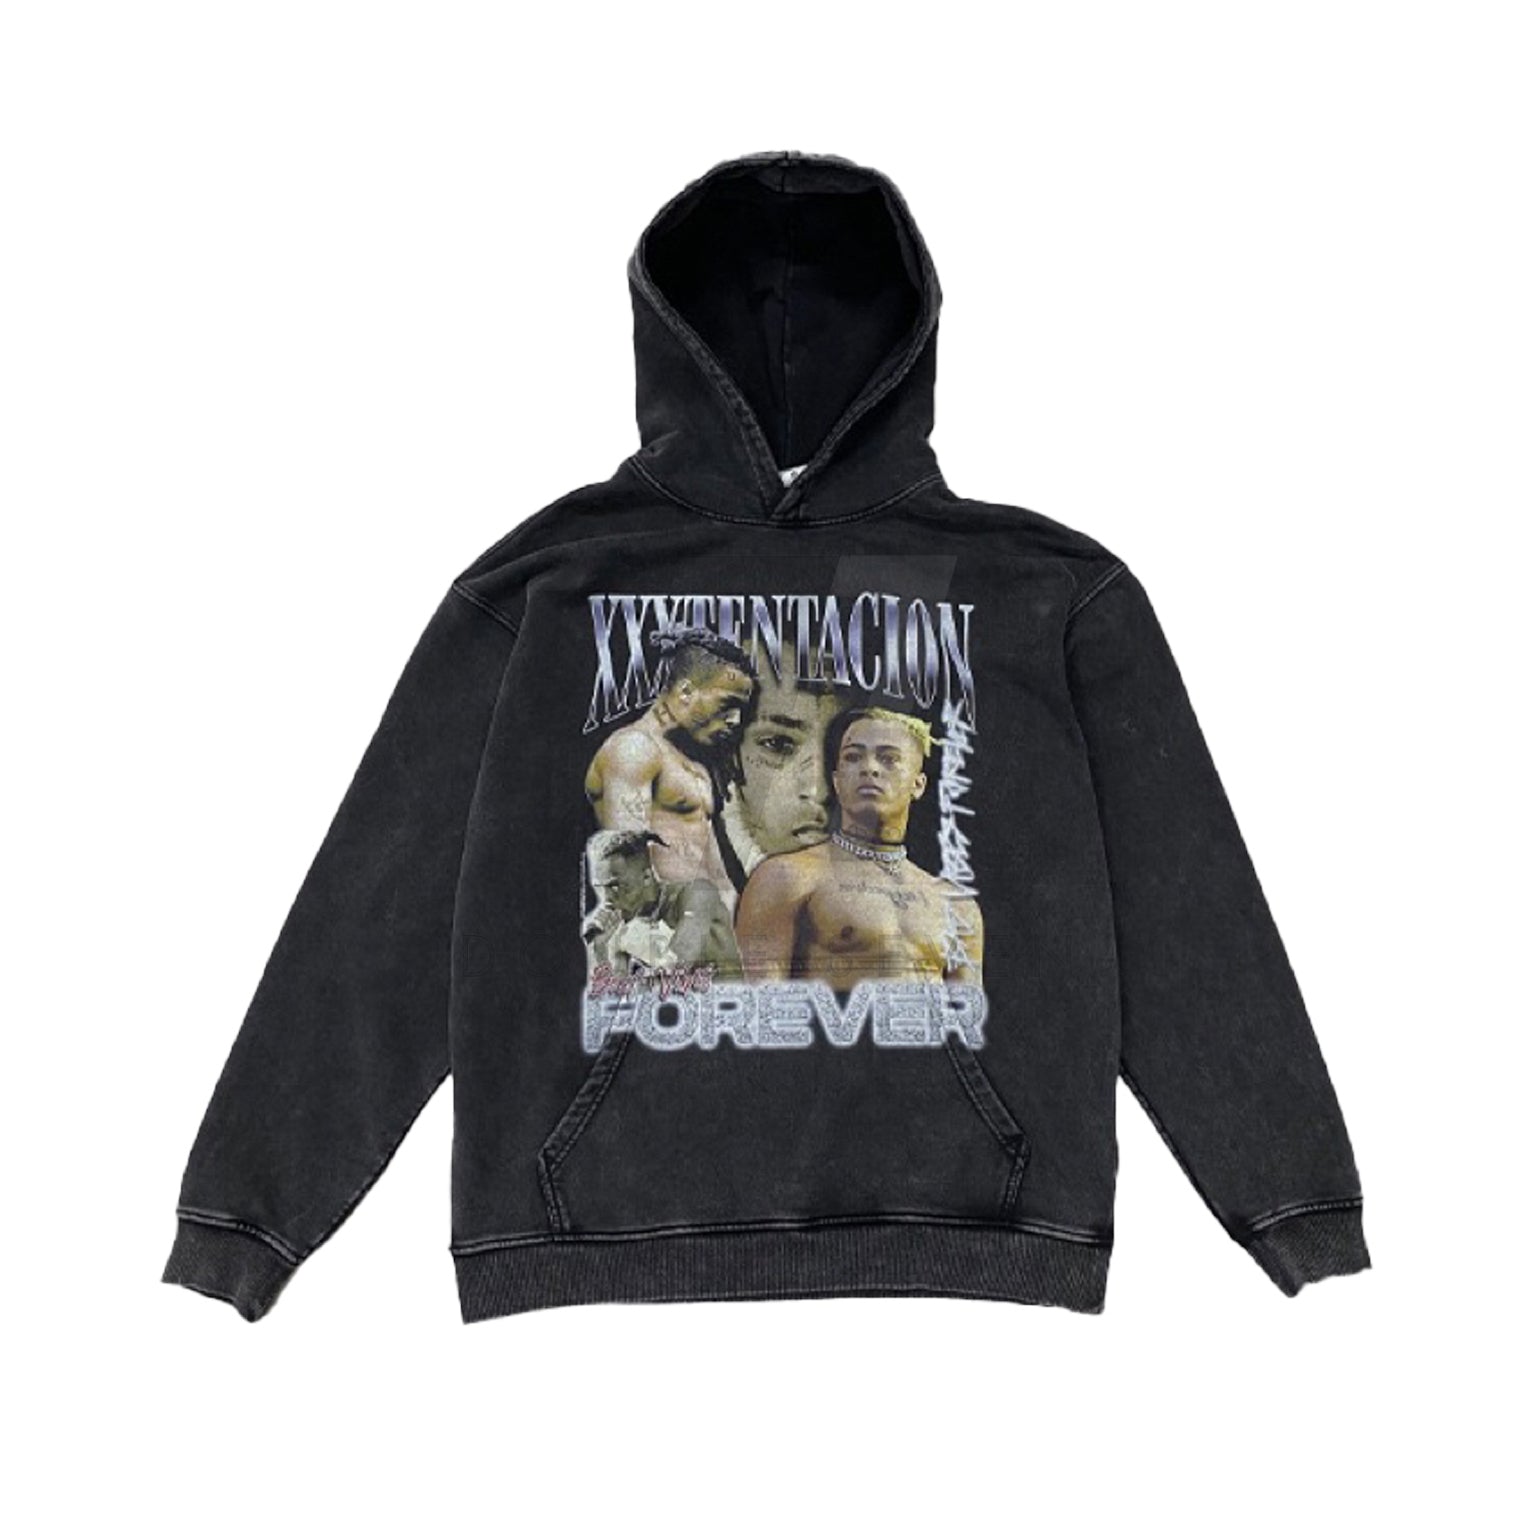 XXX “Look At Me!” Washed Oversized Hoodie